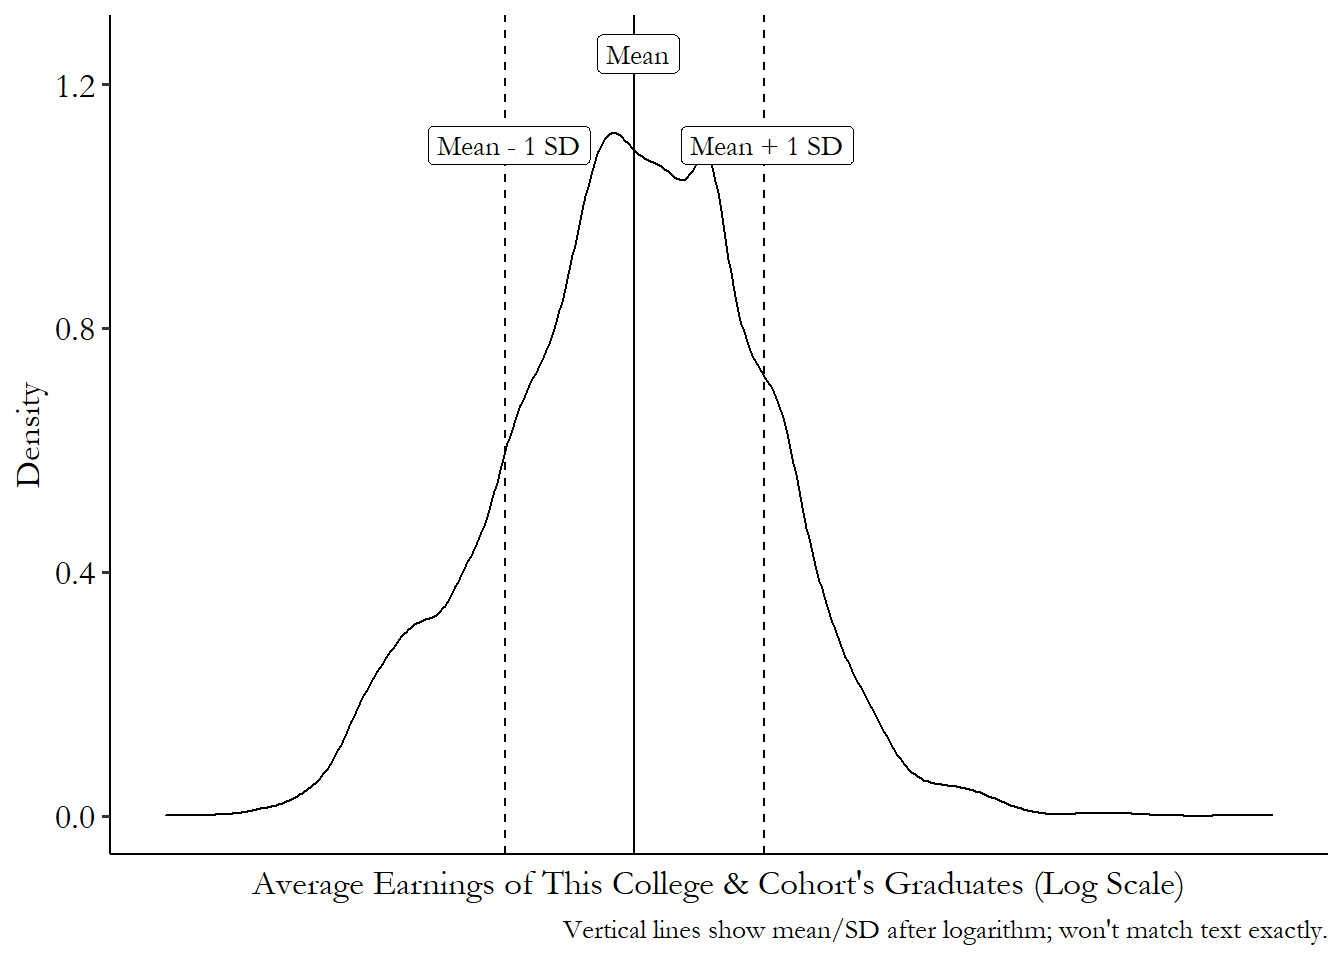 Density plot of the average earnings of a college cohort, with markers at the mean and the mean plus and minus one standard deviation